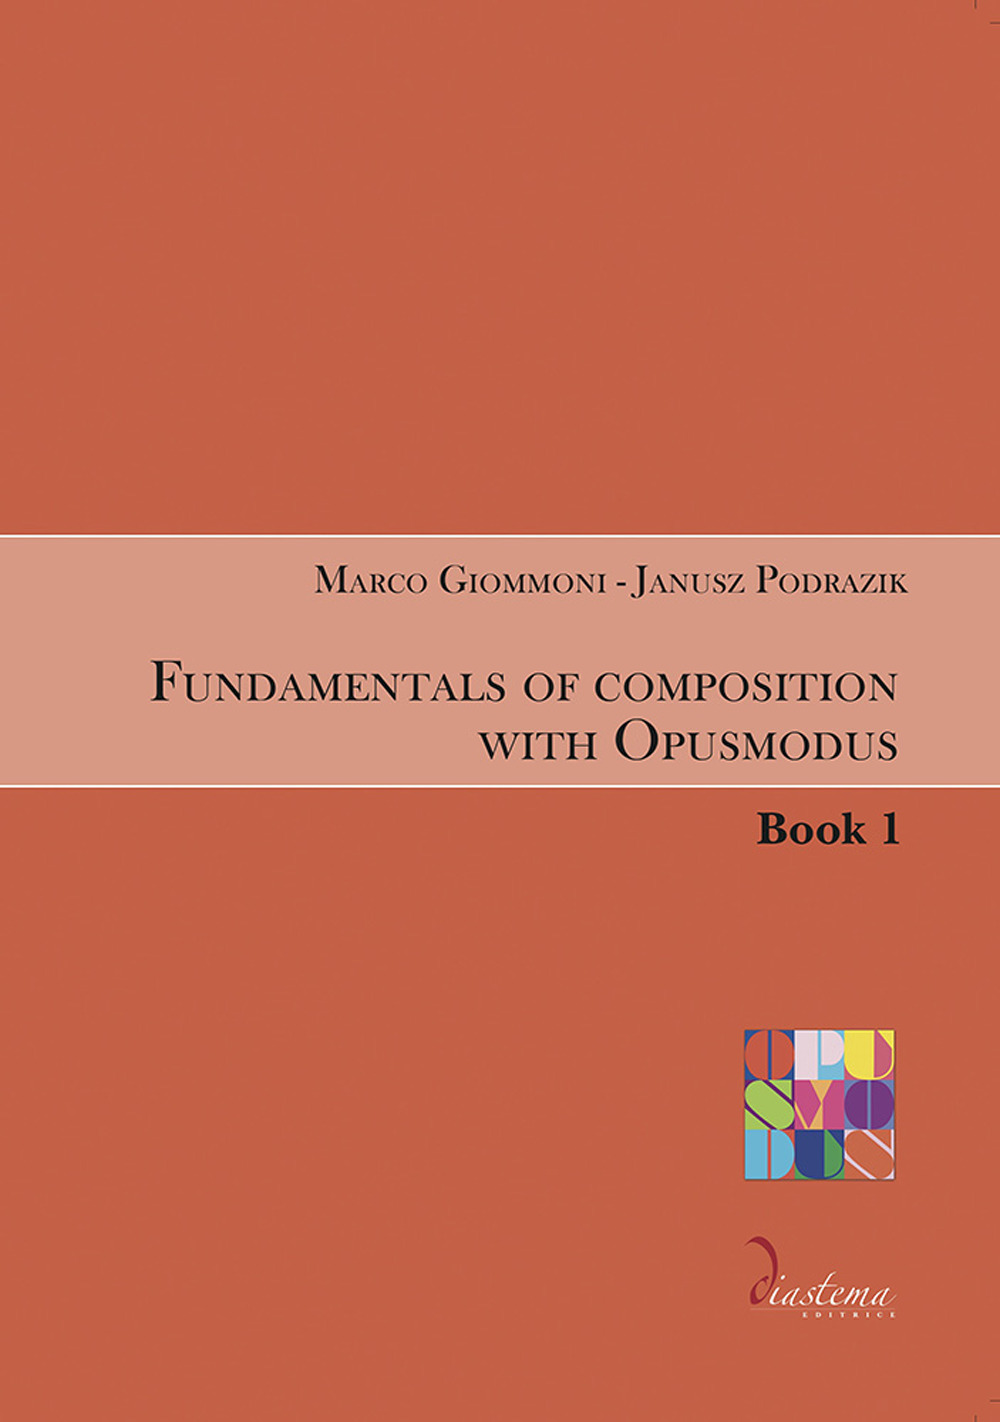 Fundamentals of composition with Opusmodus. Vol. 1